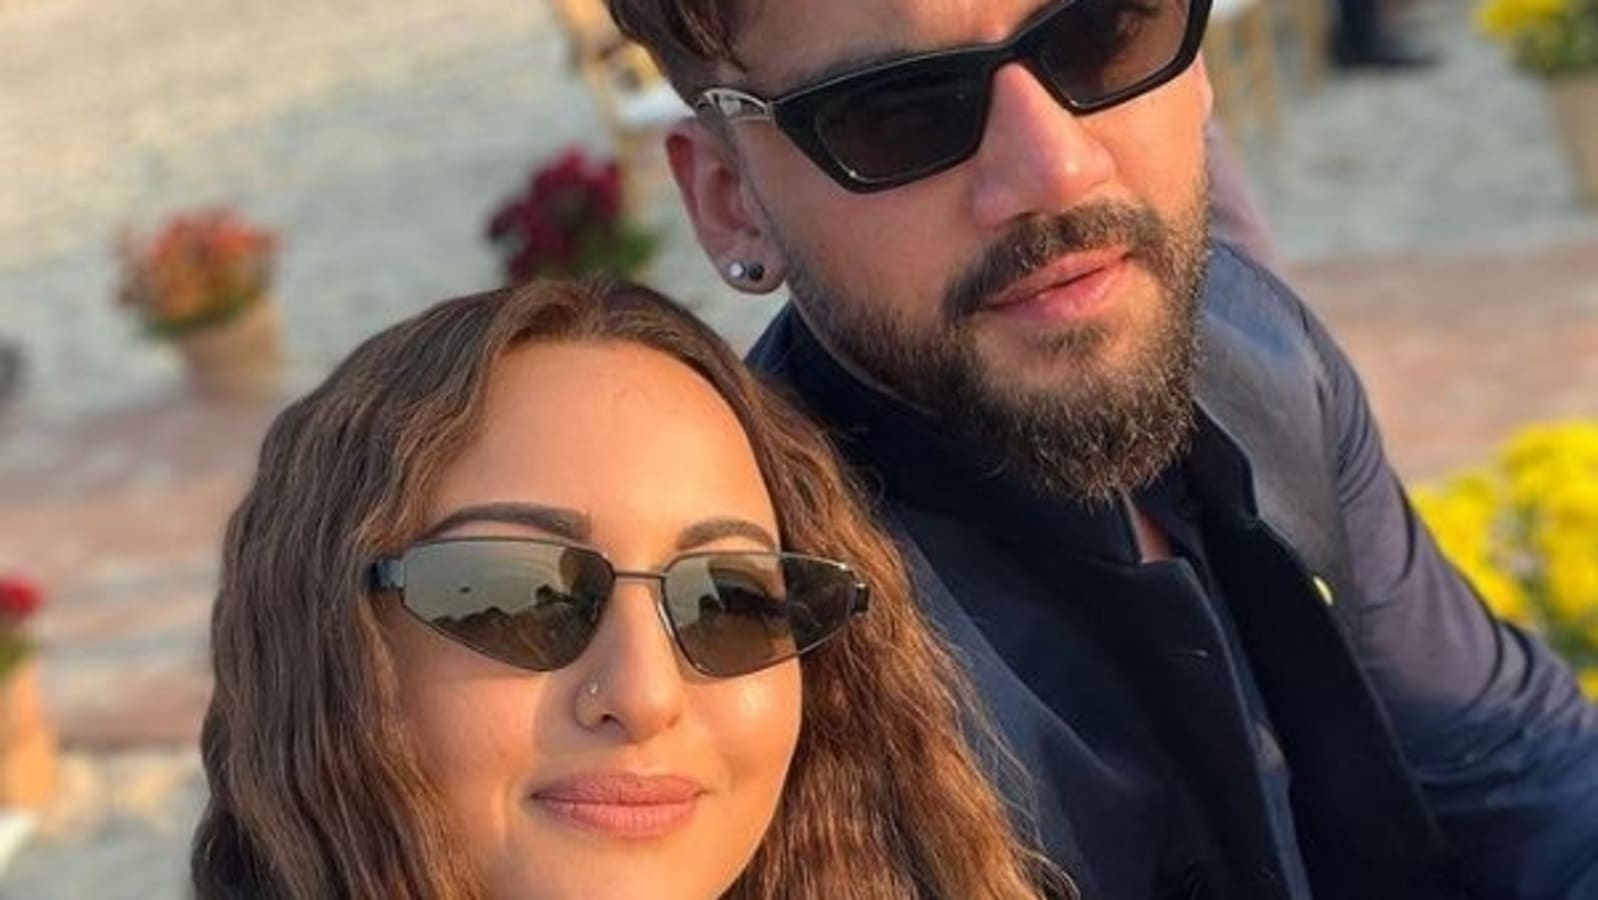 Sonakshi Xvideo - Sonakshi Sinha and Zaheer Iqbal say 'I Love You' to each other. Watch video  | Bollywood - Hindustan Times